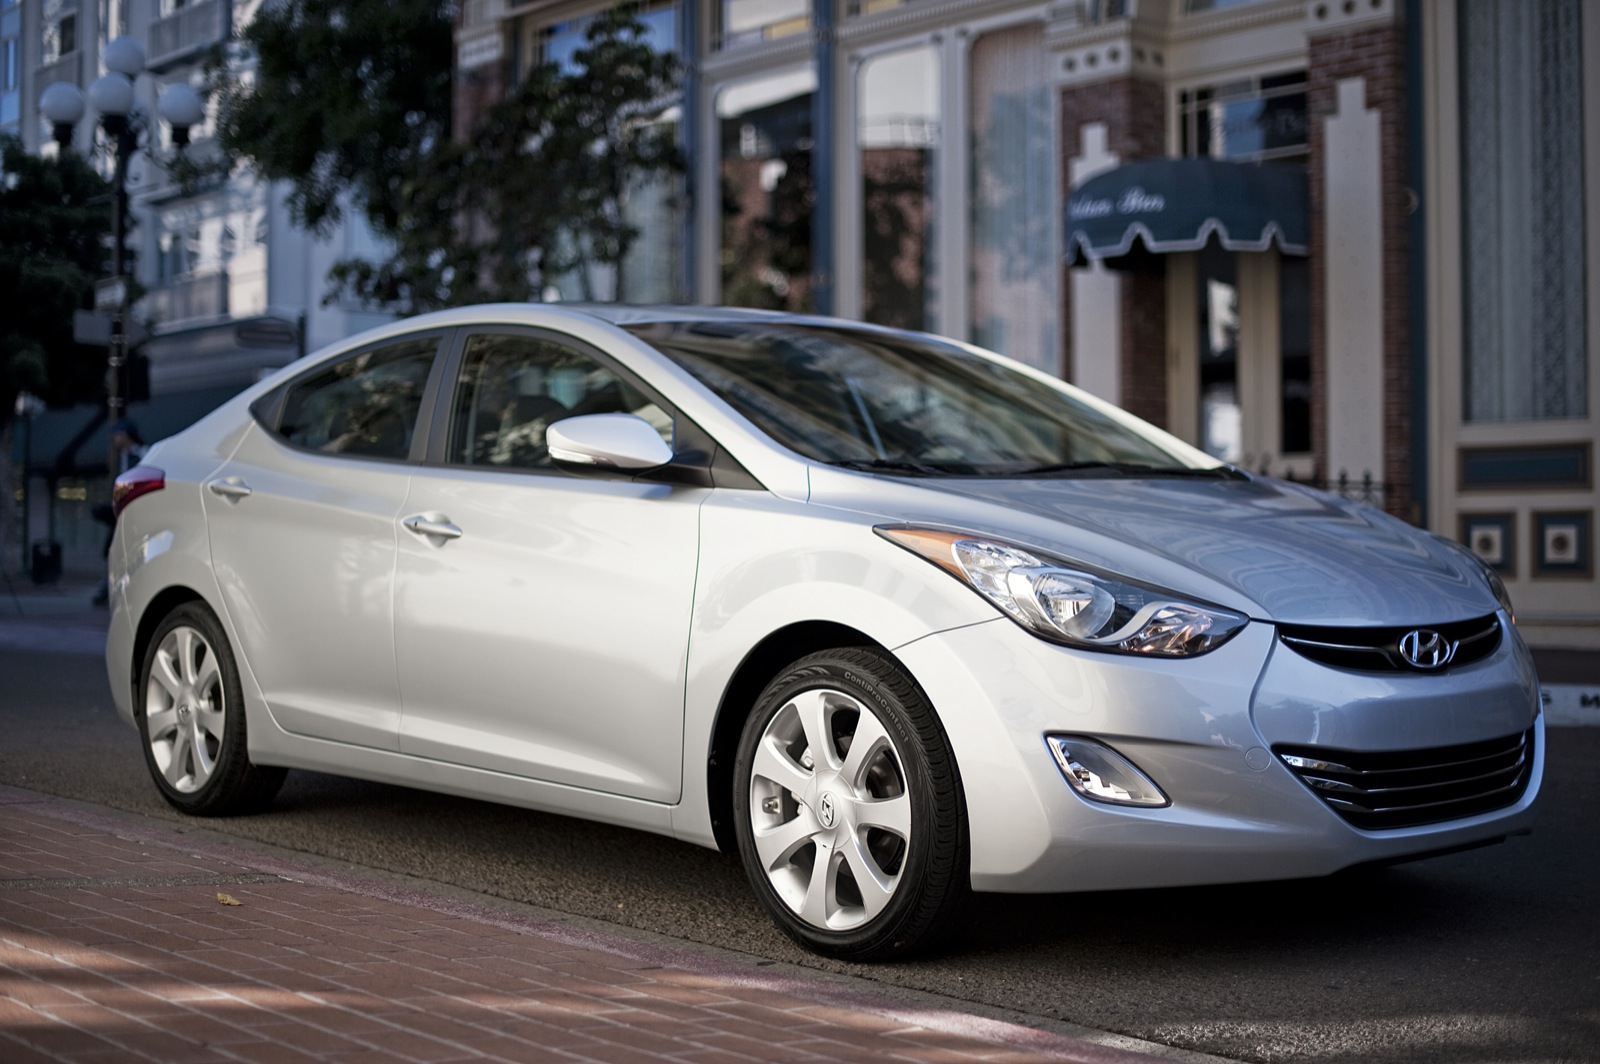 Five Things We Like About The New 2011 Hyundai Elantra (Video)